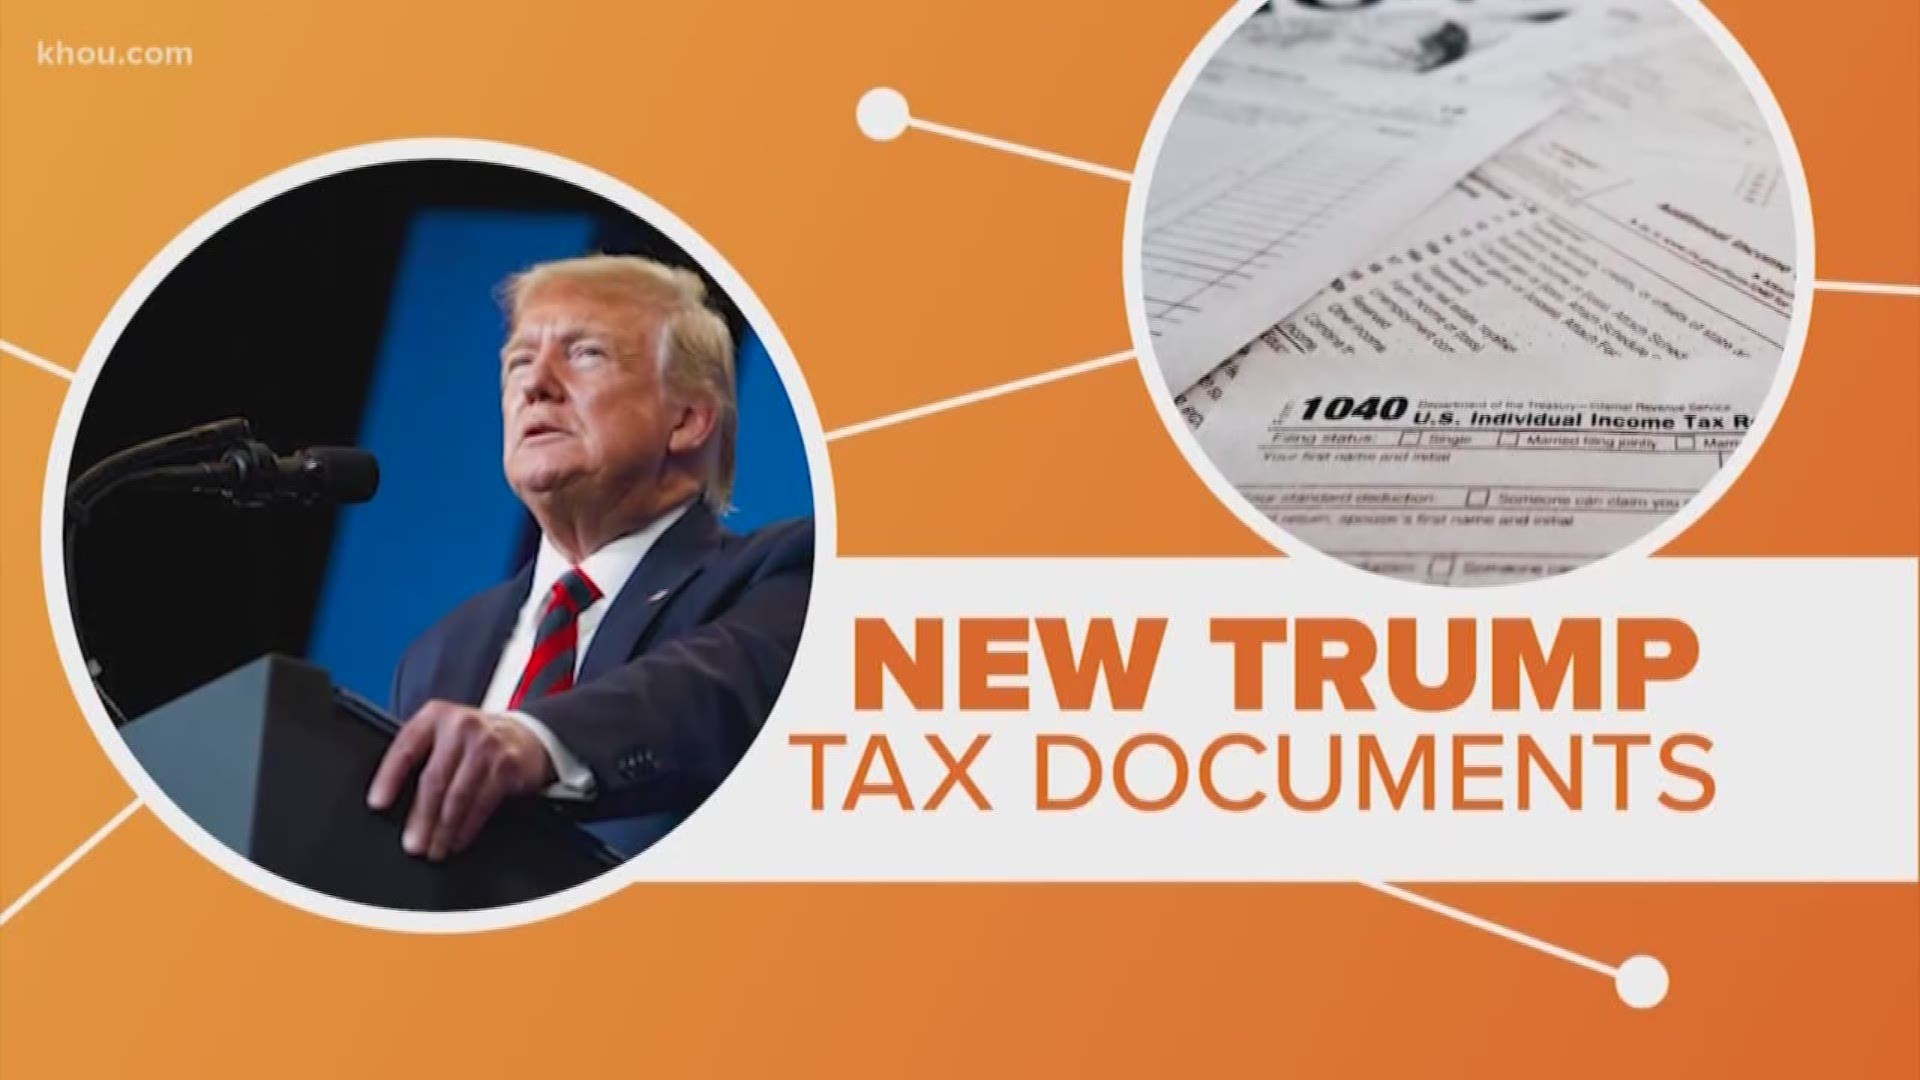 There's been a big debate over President Trump's tax returns. So why haven't we seen it play out, in court? Our Marcelino Benito connects the dots.